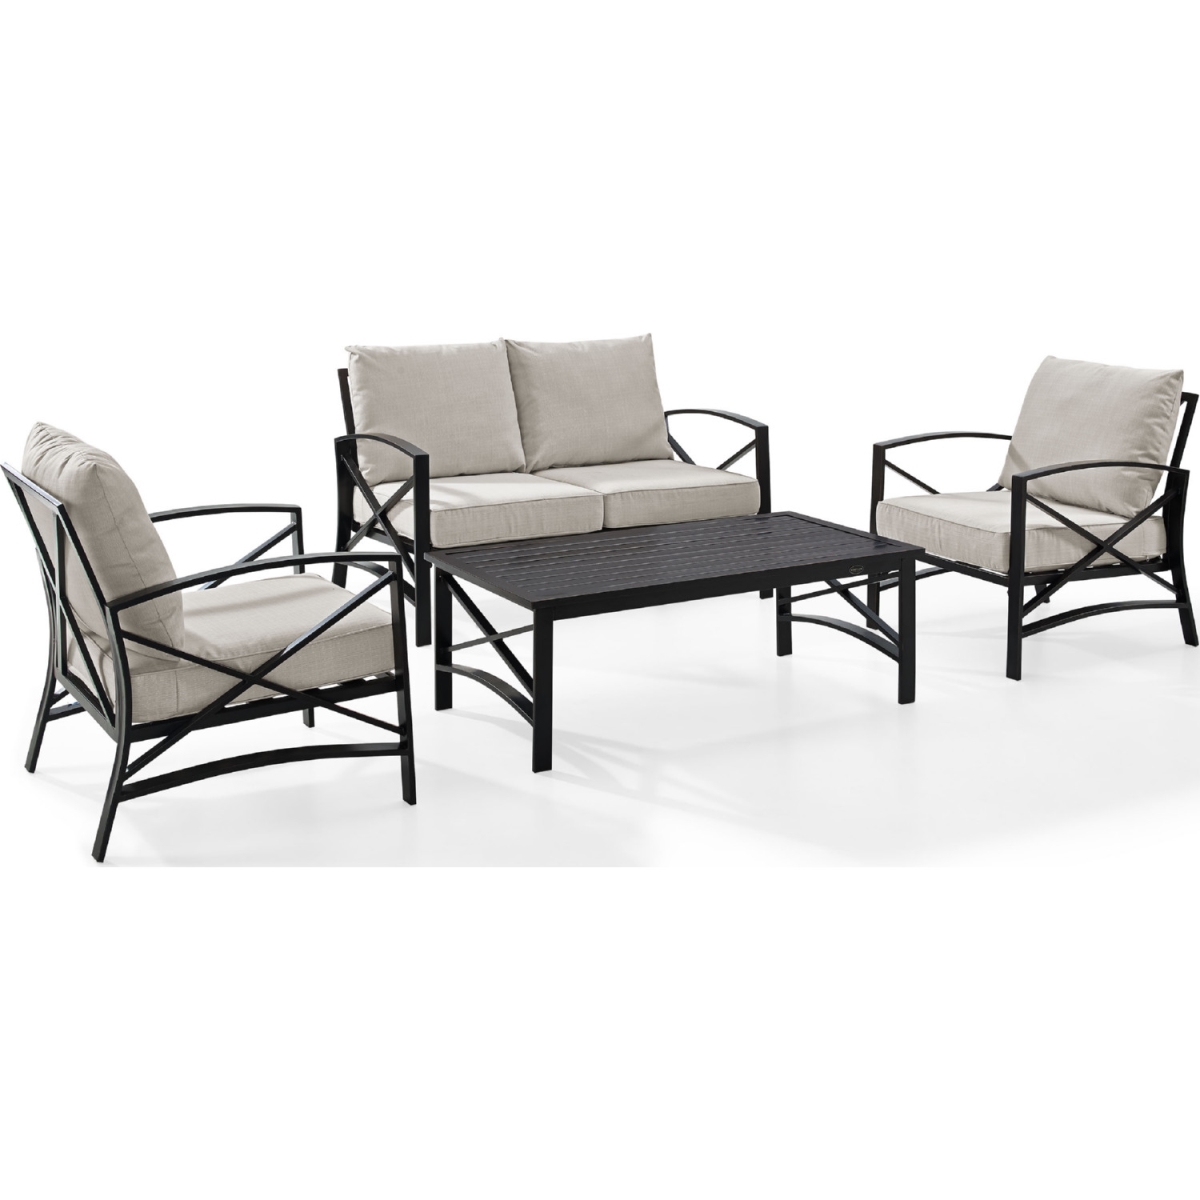 4 Piece Kaplan Outdoor Seating Set With Oatmeal Cushion - Loveseat, Two Chairs, Coffee Table